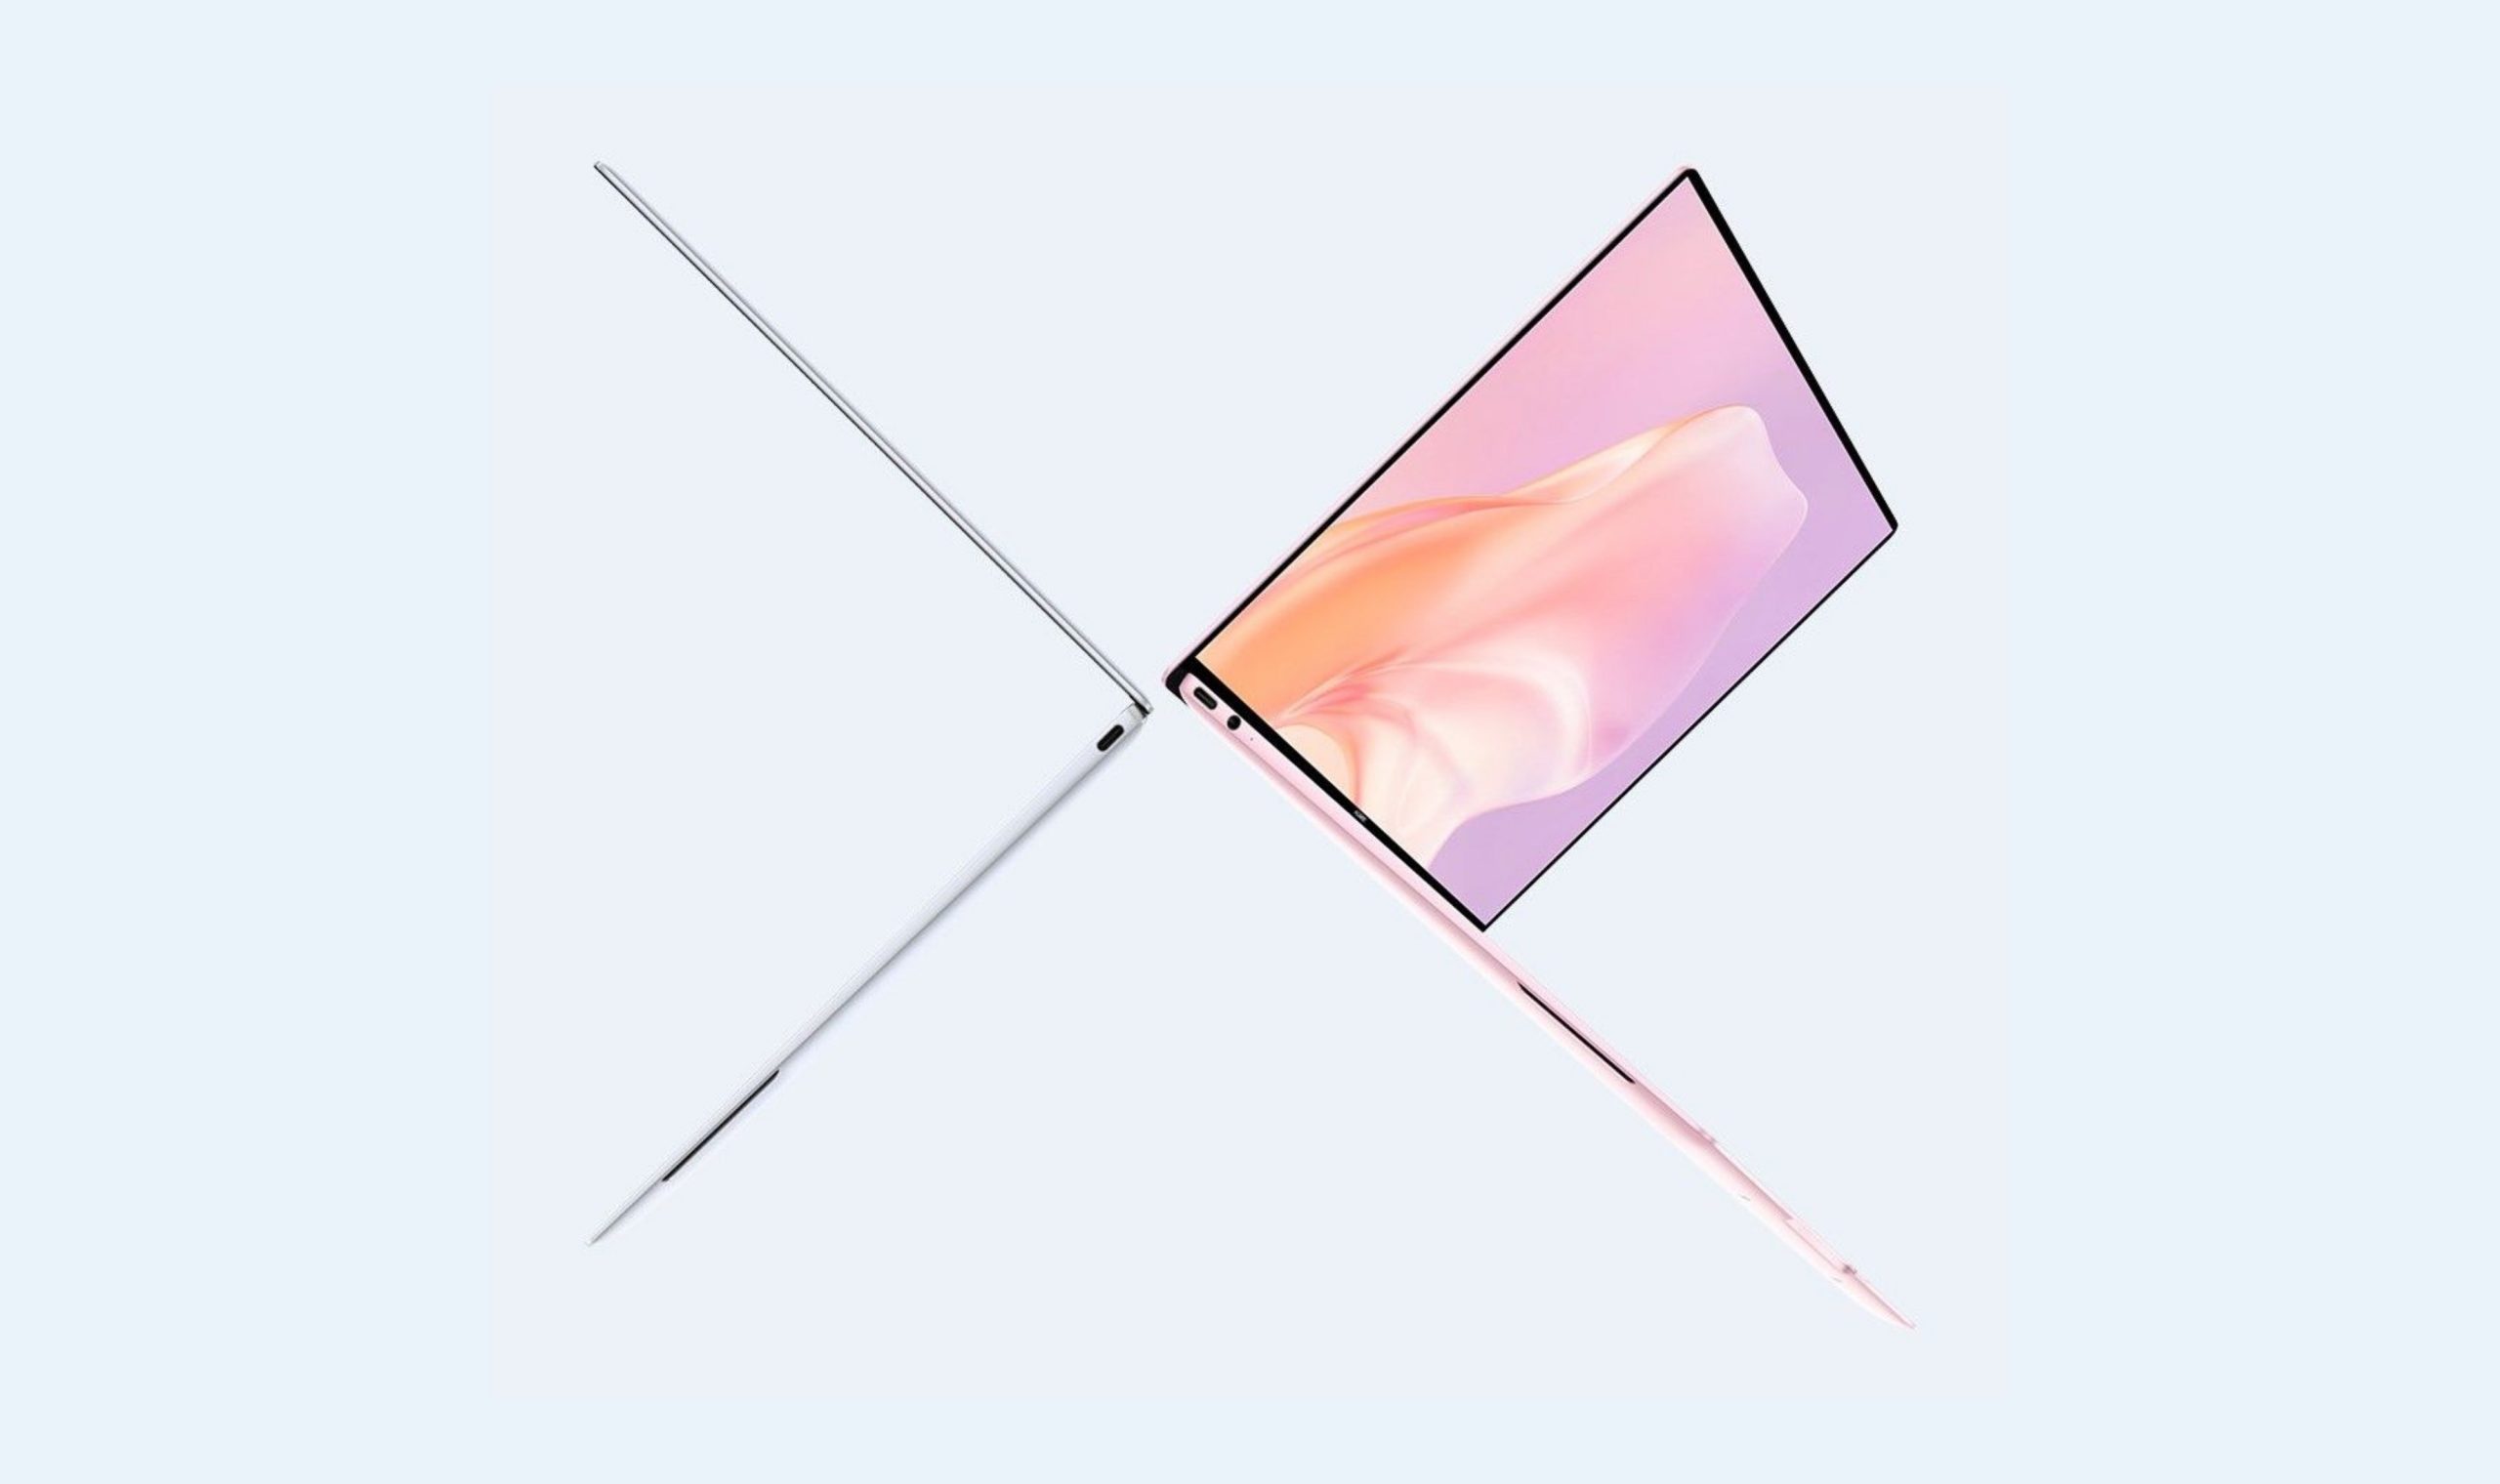 HUAWEI MateBook X 2020 teaser poster reveals at least two colors for the laptop